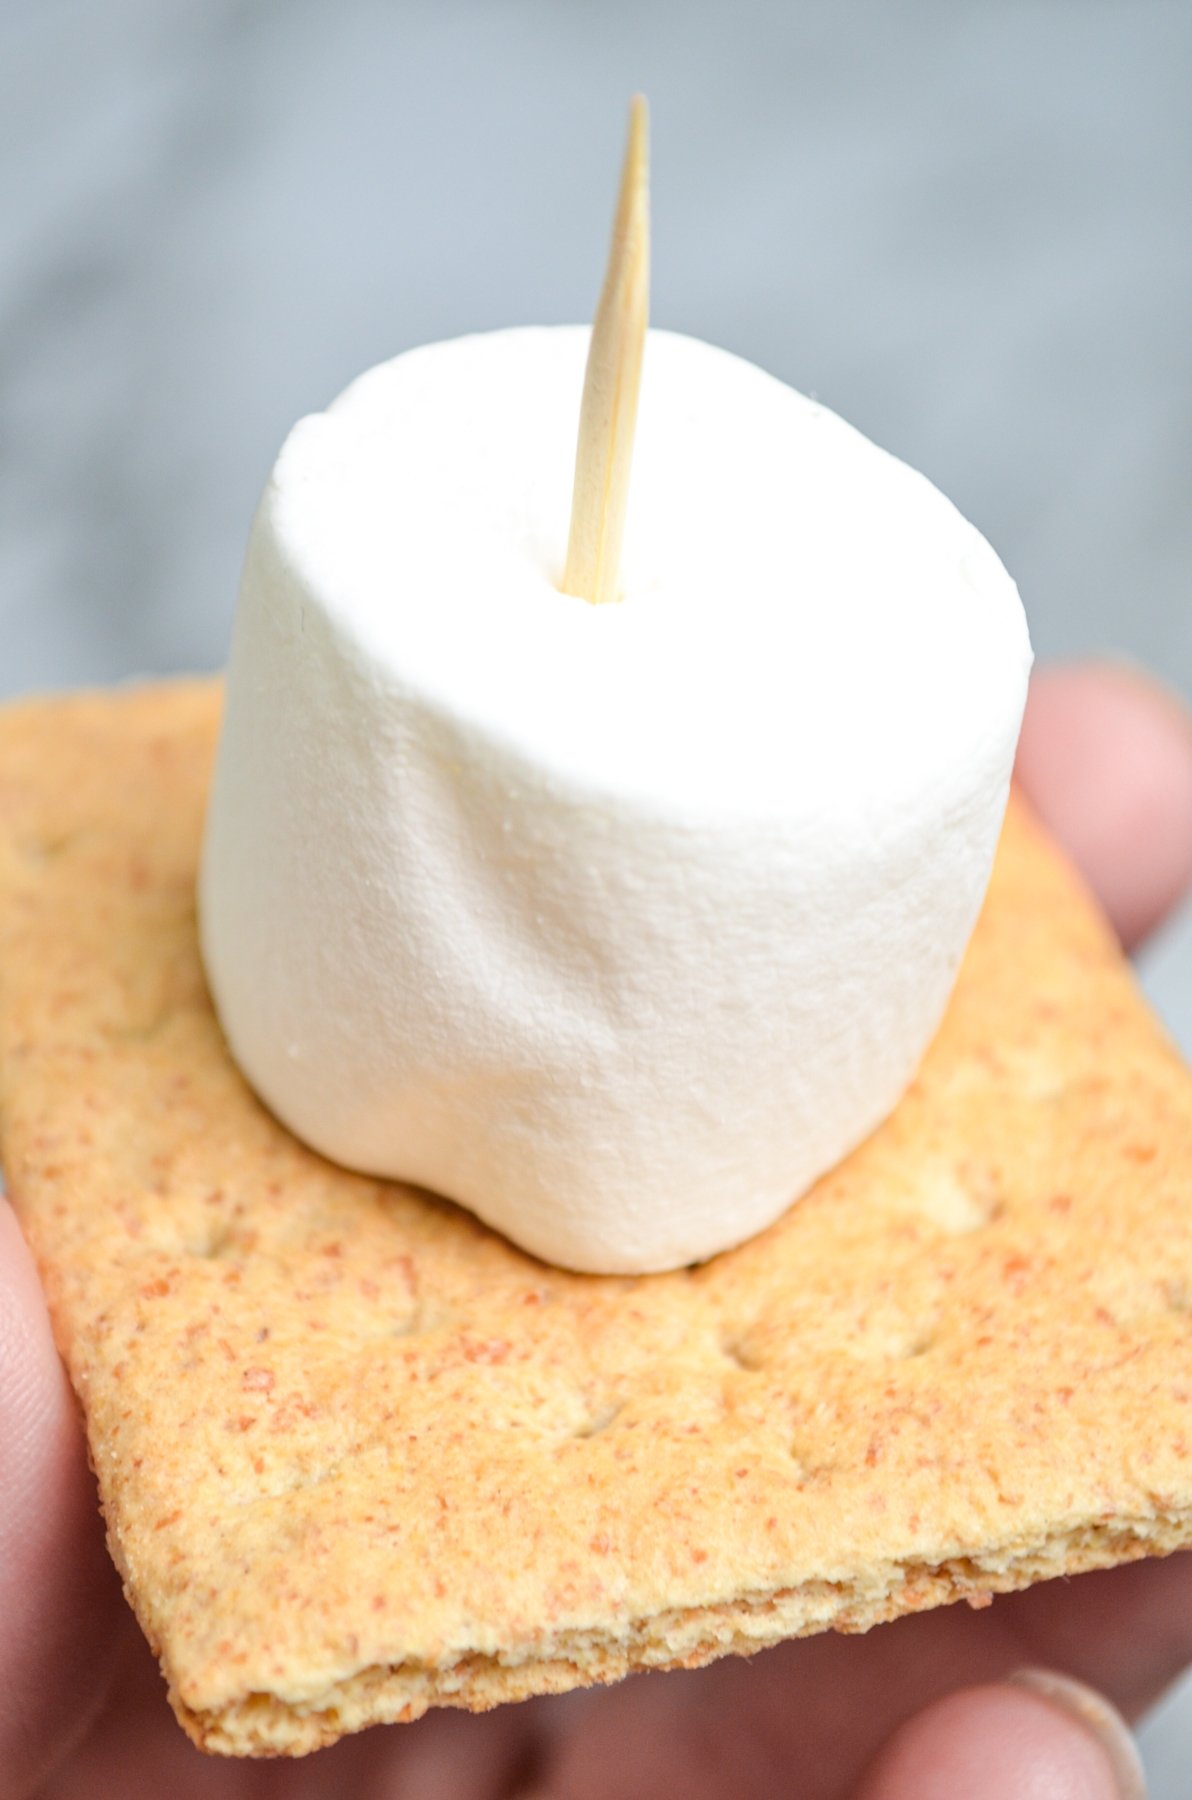 A graham cracker speared with a toothpick and a marshmallow.